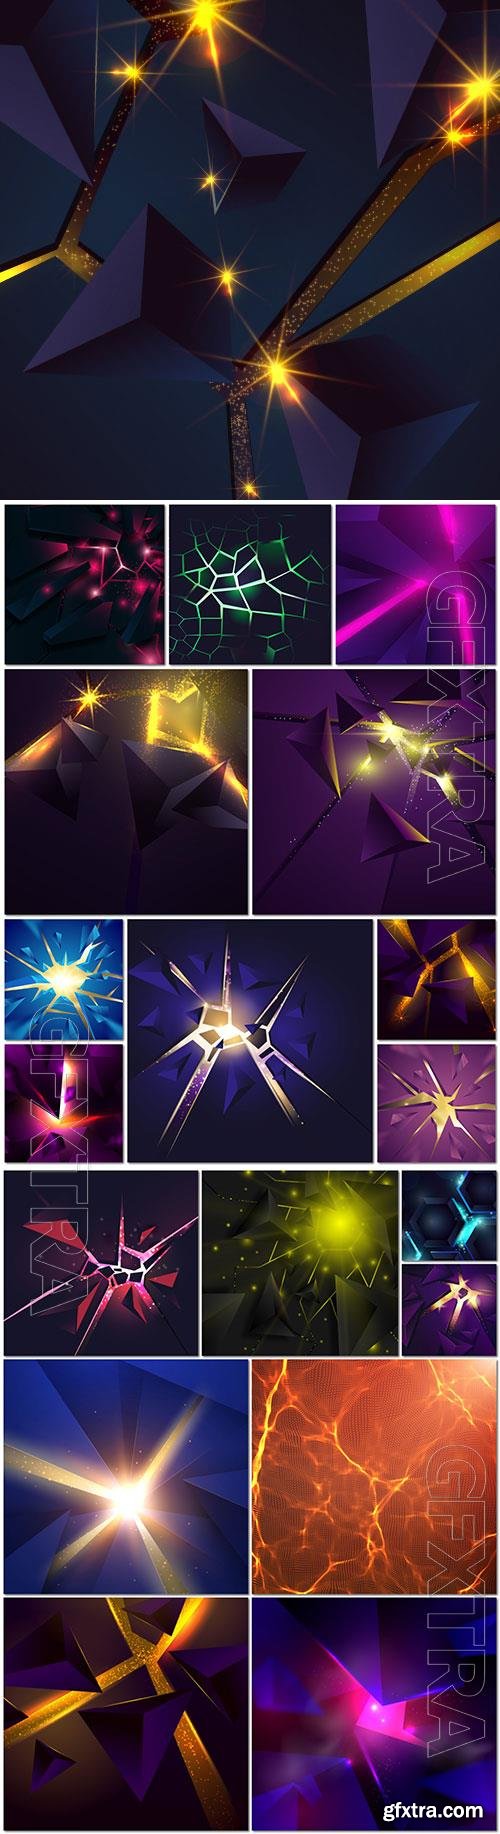 3d explosion with light background in vector